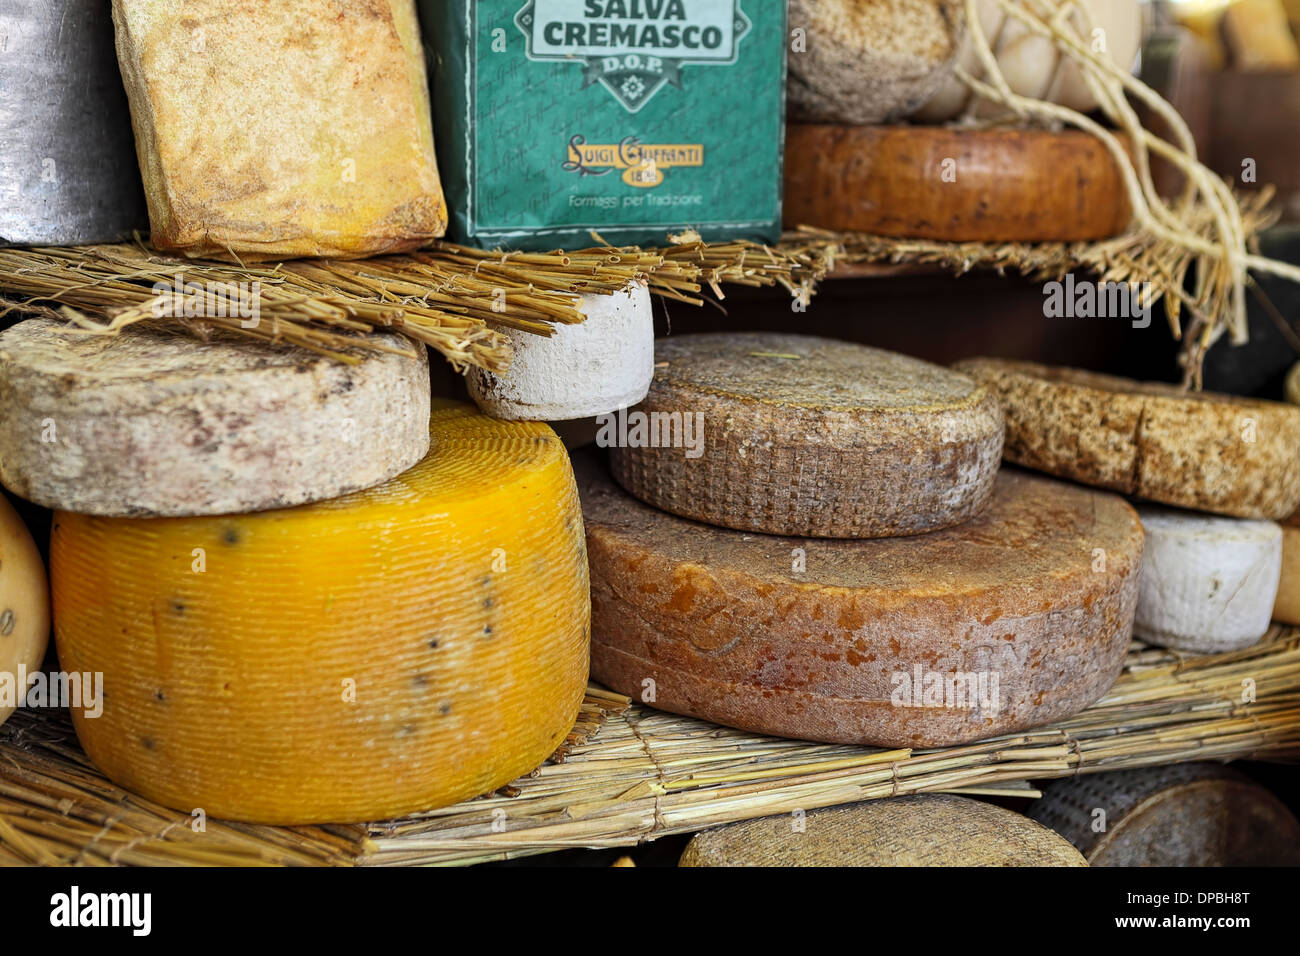 Different types of mature hard cheese on the stand in Italy. Stock Photo